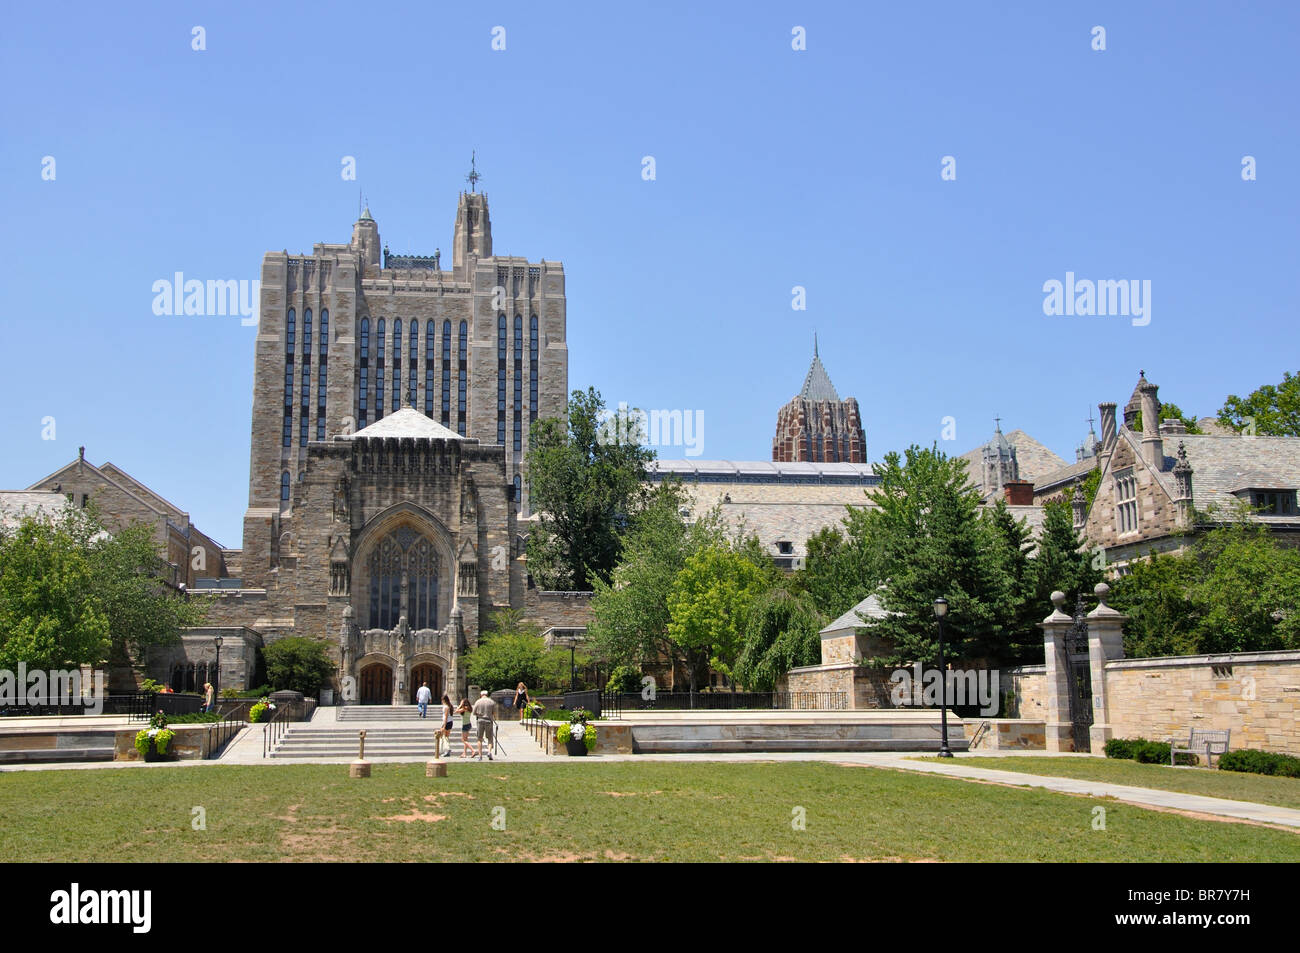 Sterling Memorial Library, Yale University, New Haven, Connecticut, USA Banque D'Images